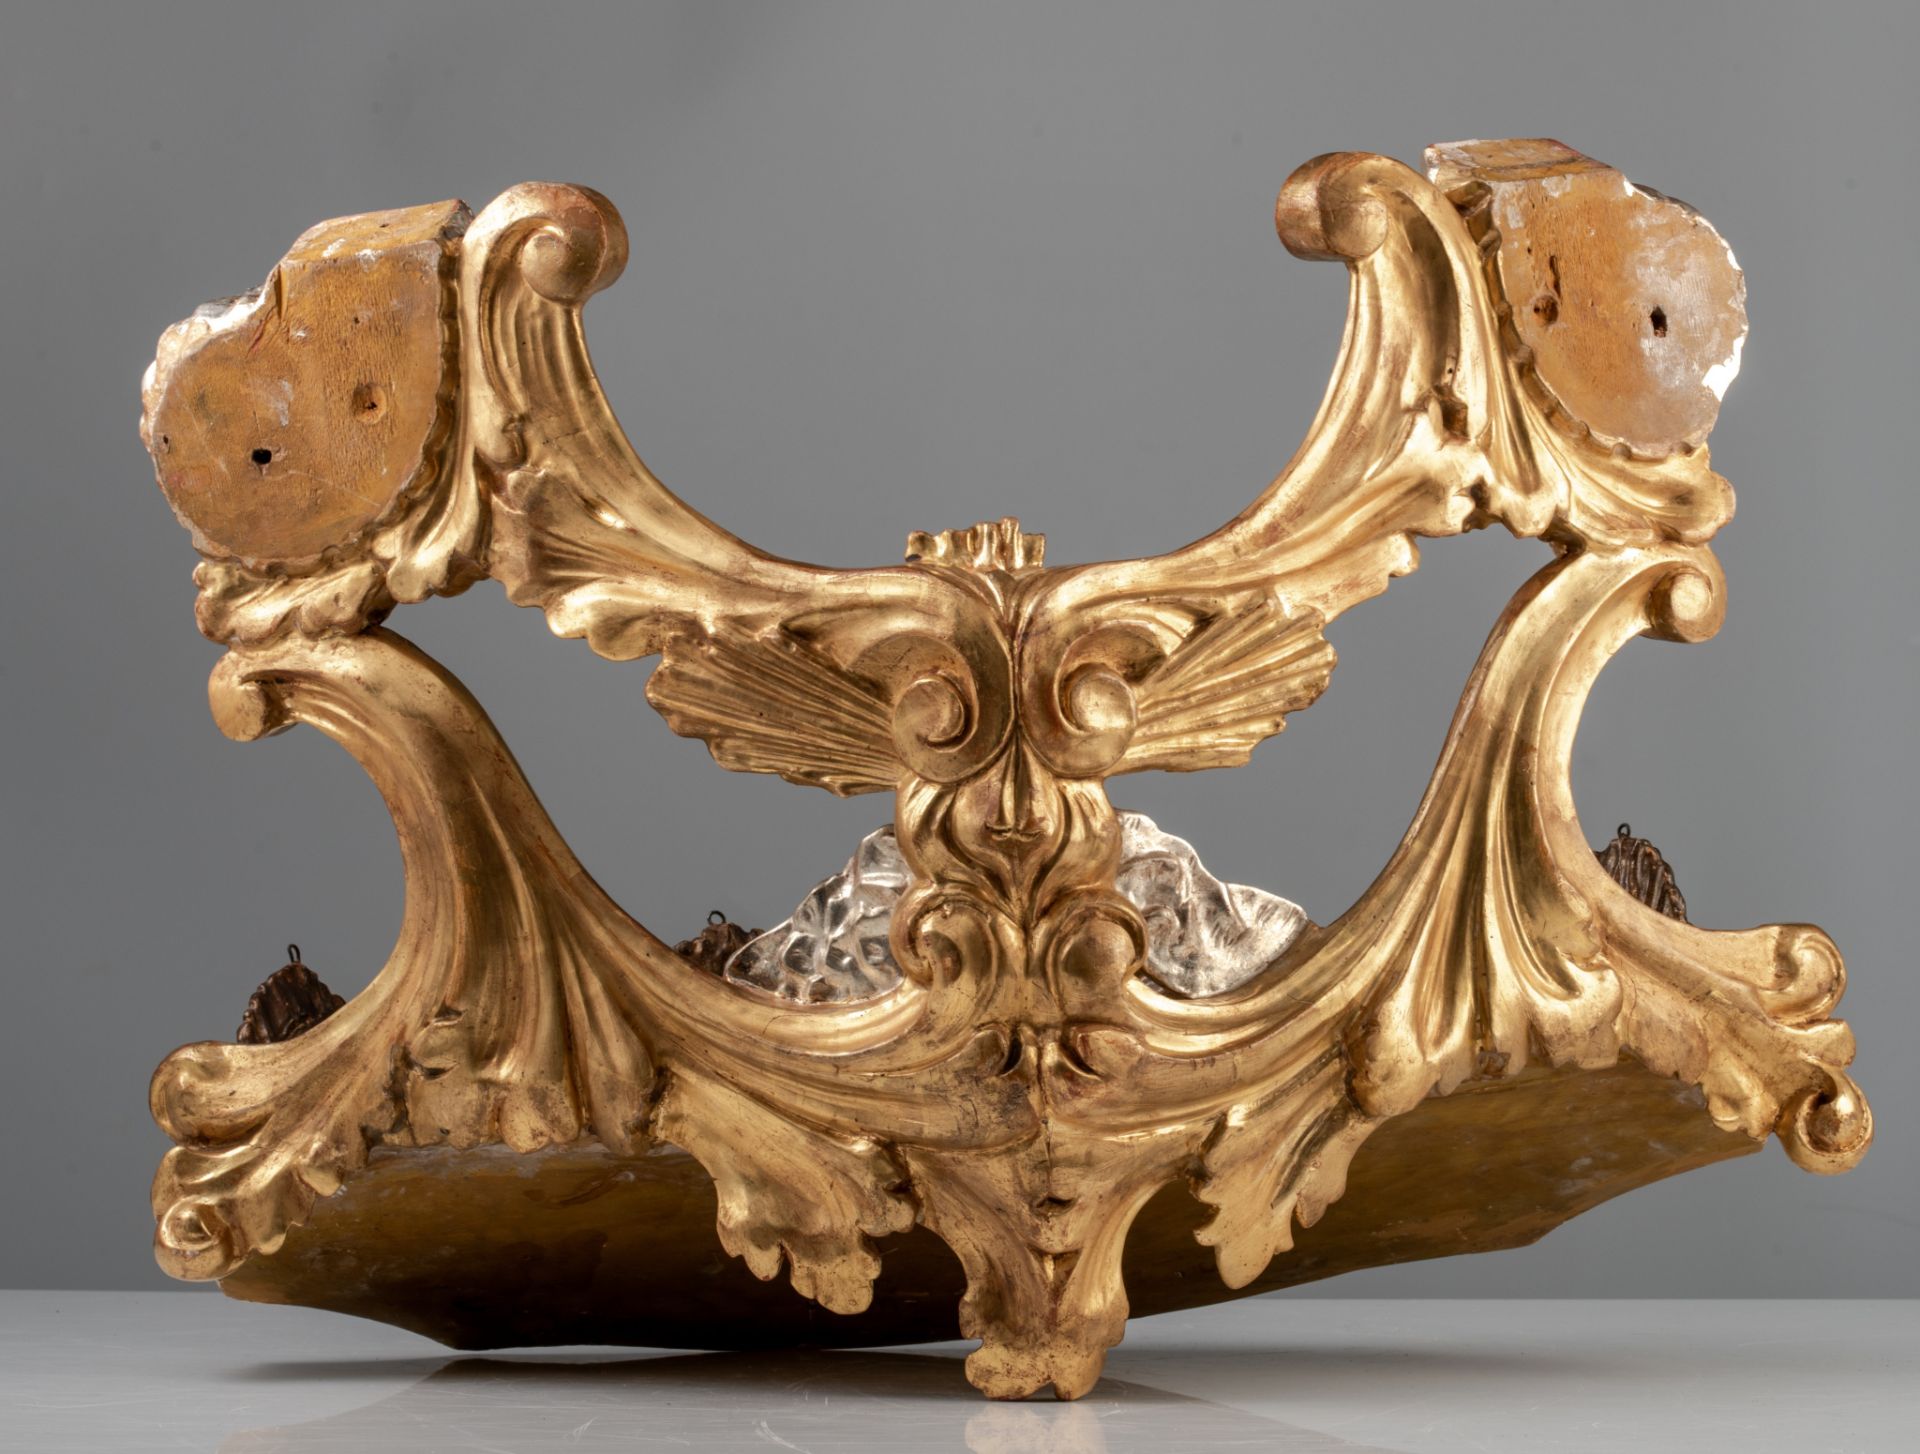 A gilt and silver wooden baldachin with the dove of the Holy Spirit, 18thC, H 50 - W 63 cm - Image 7 of 14